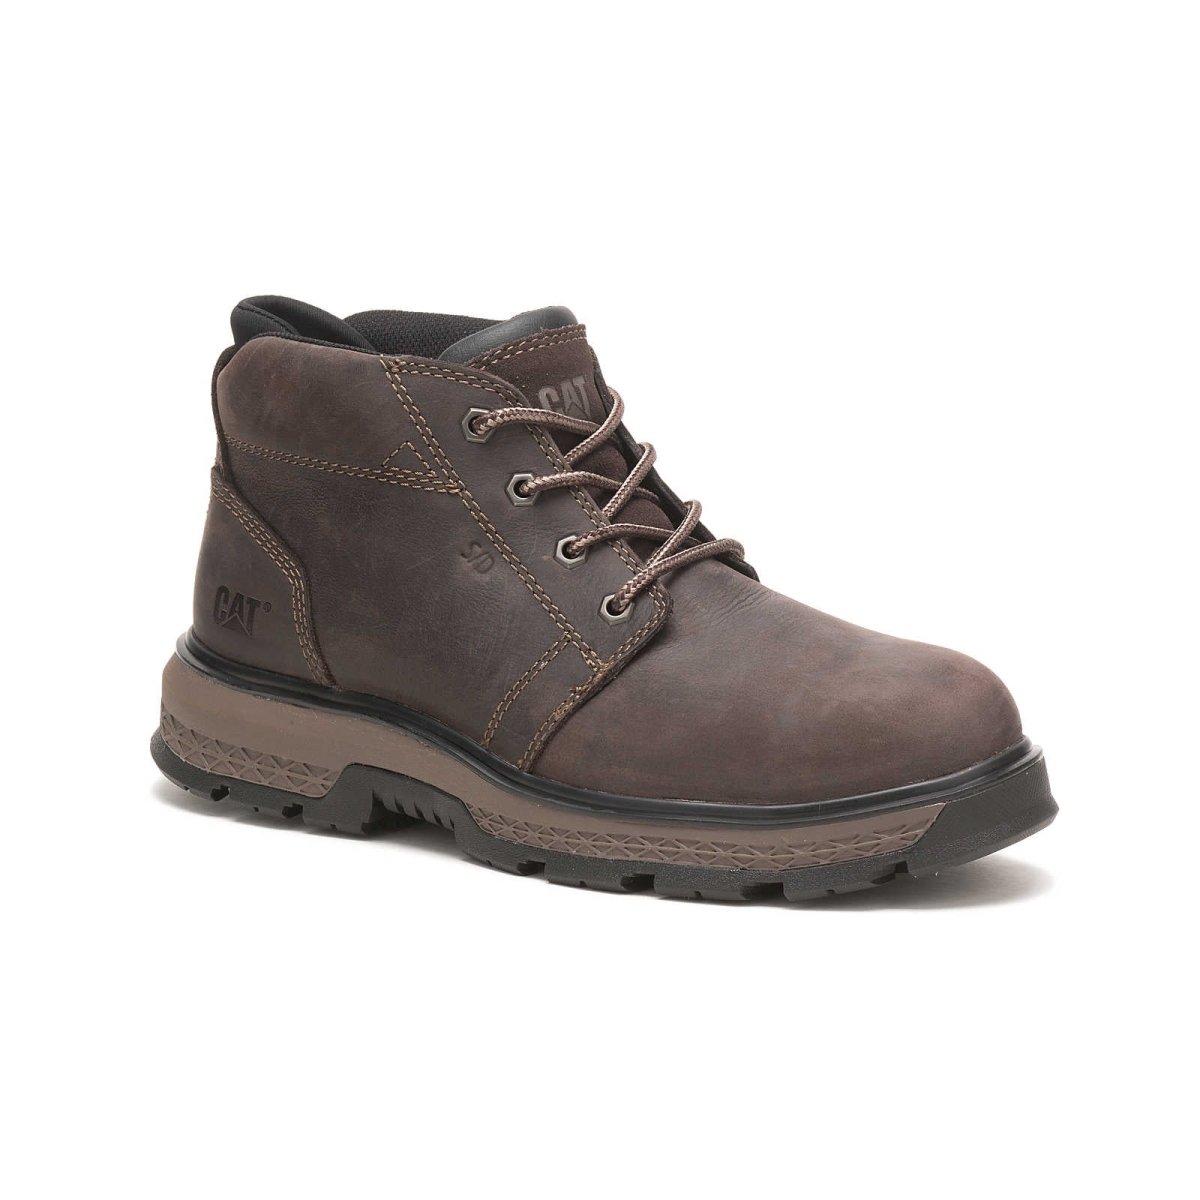 CATERPILLAR EXPOSITION 4.5" ALLOY TOE STATIC DISSIPATIVE WORK BOOT (P91367) IN DEMITASE - TLW Shoes